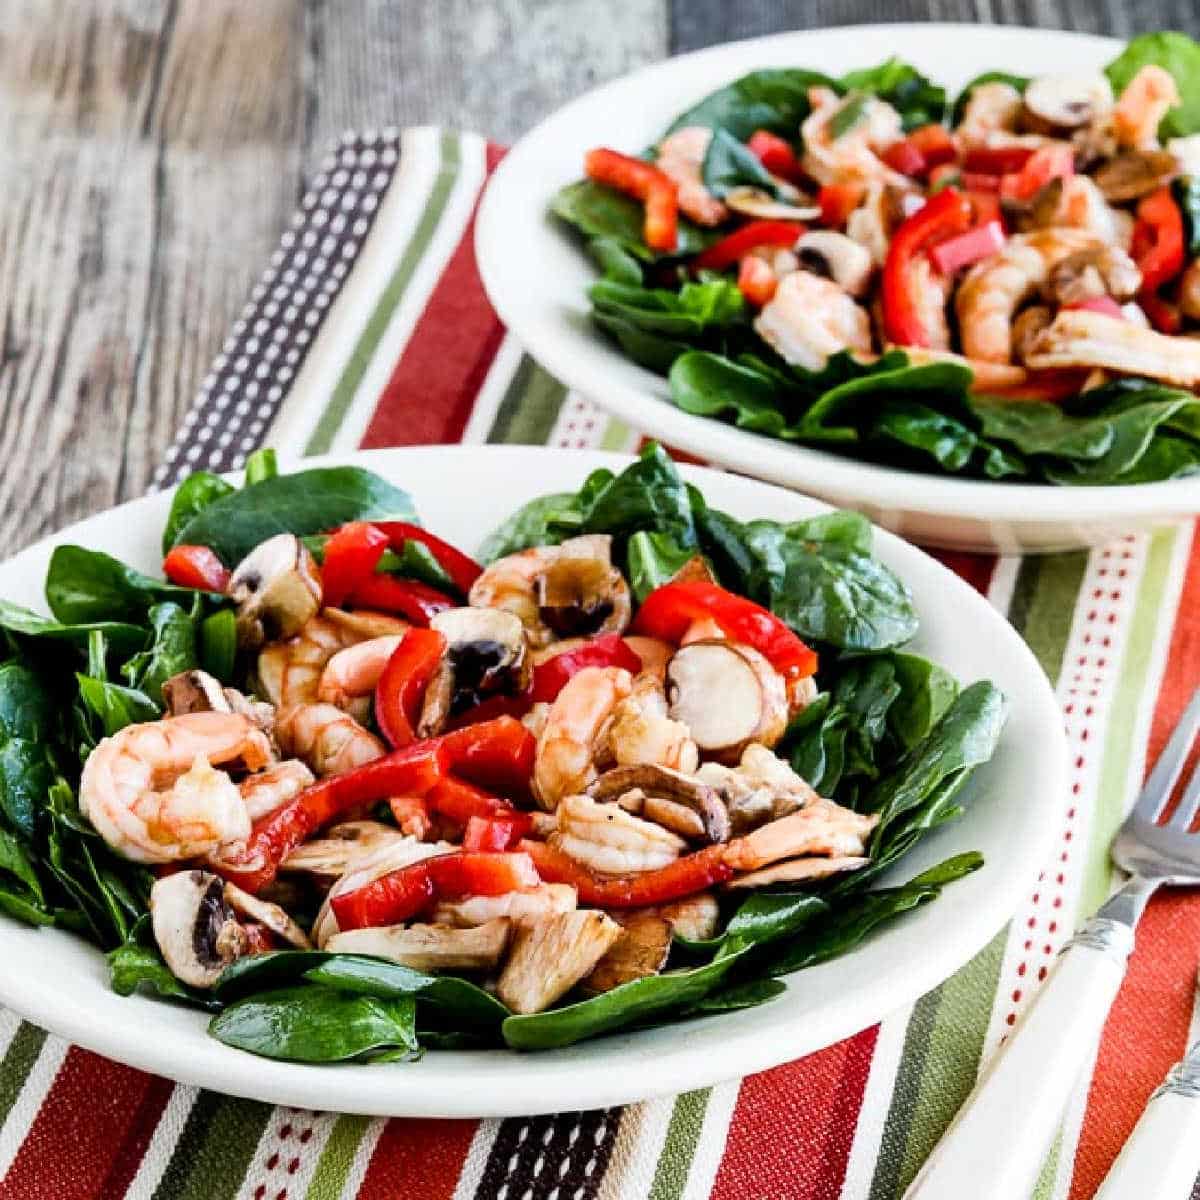 Spinach Salad with Shrimp shown in two serving bowls on colorful napkin.